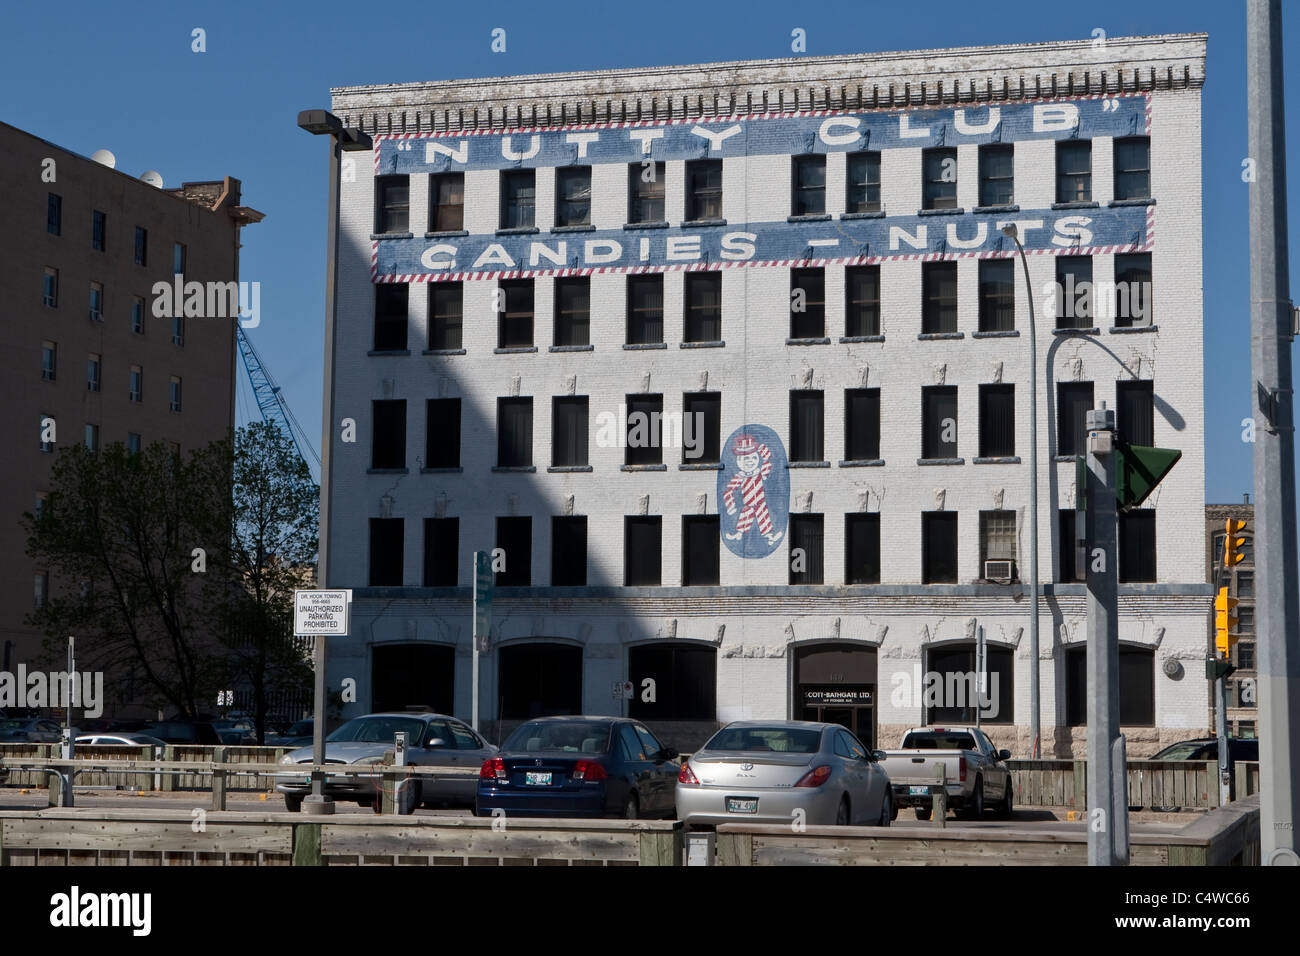 Nutty Club vintage Mural advertisement is pictured in Winnipeg Thursday May 26, 2011. Stock Photo